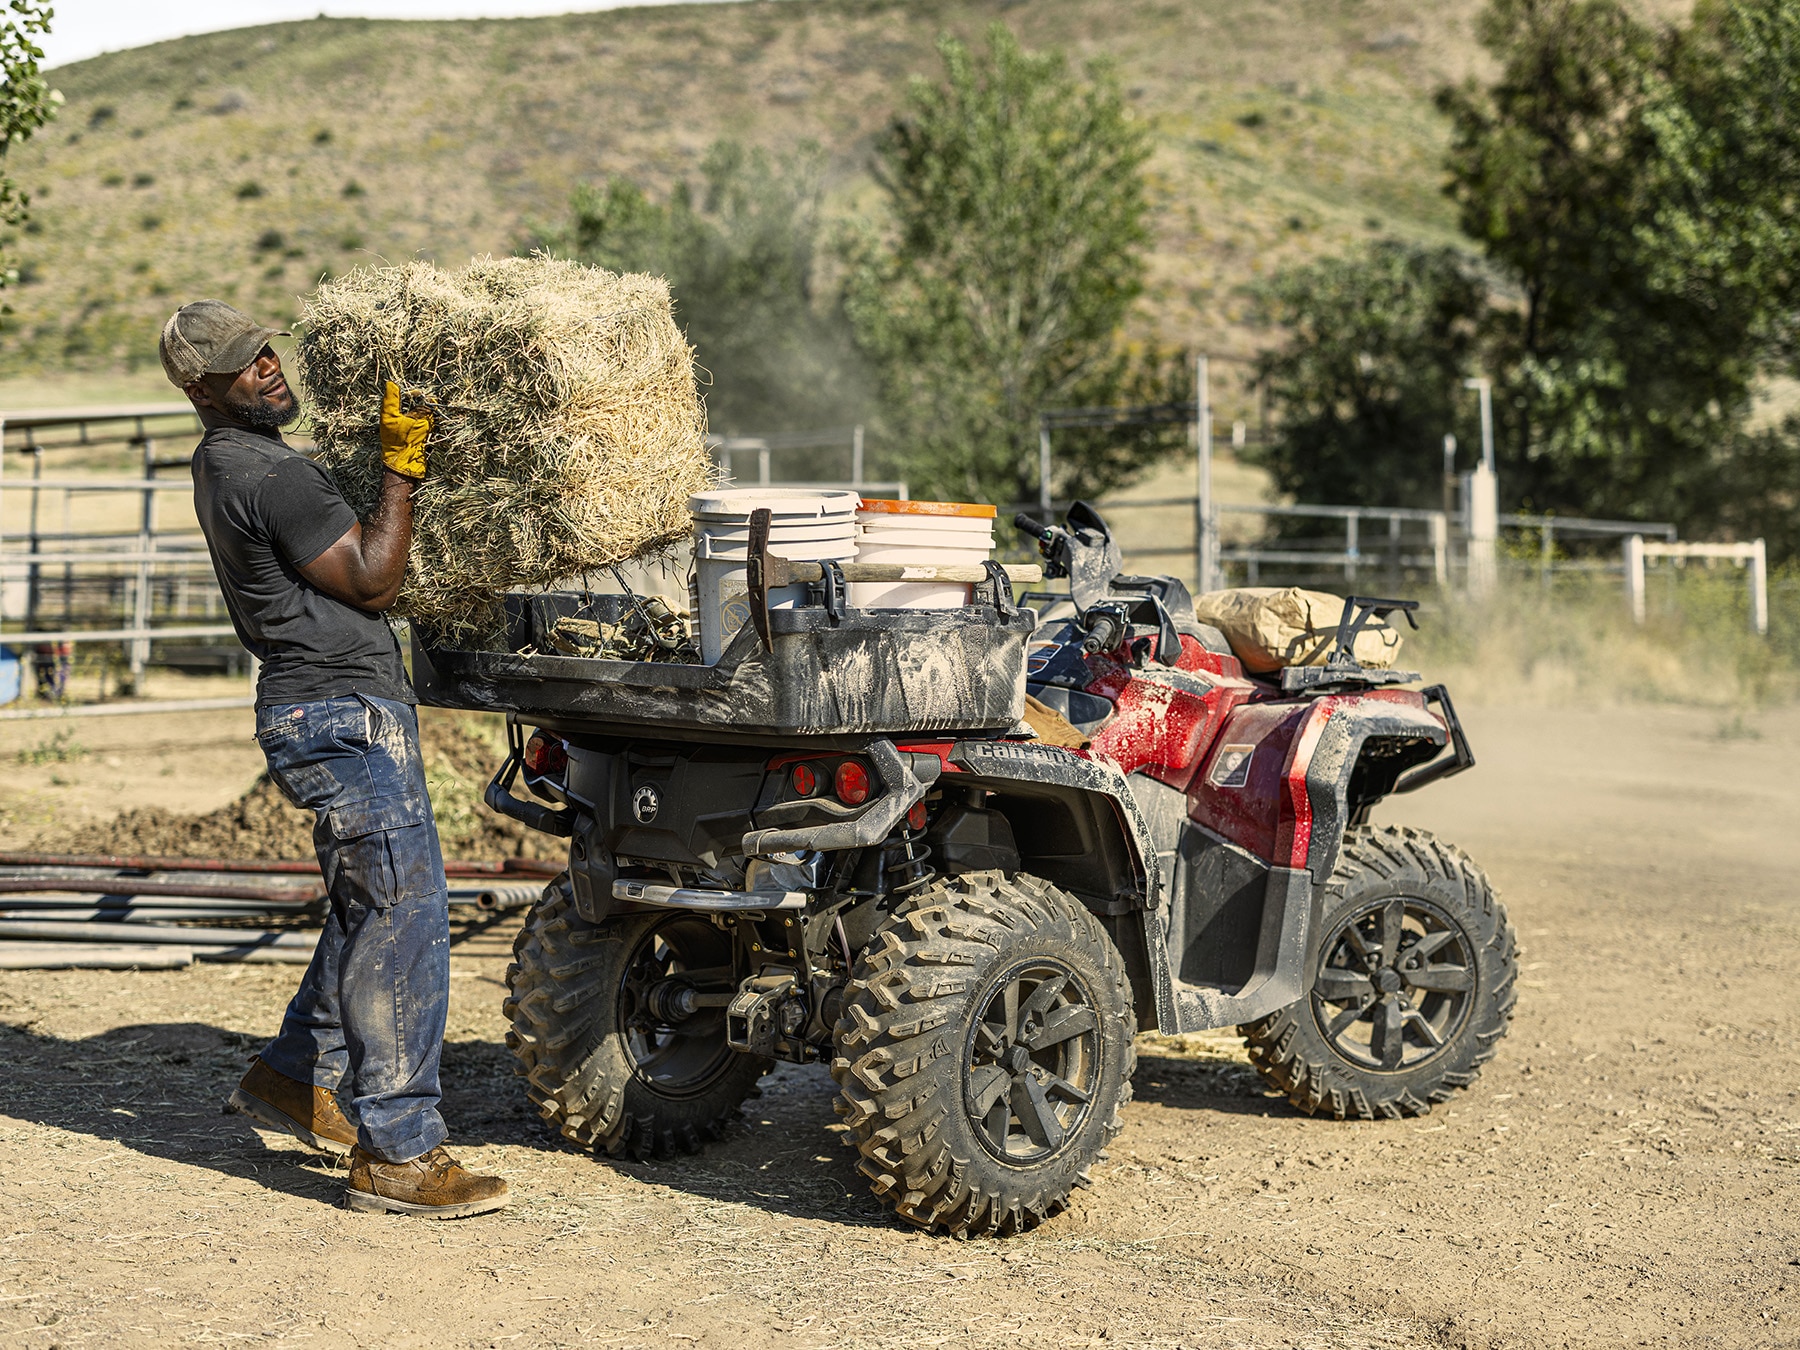 Man unloading a bale of hay from his Can-Am Outlander ATV